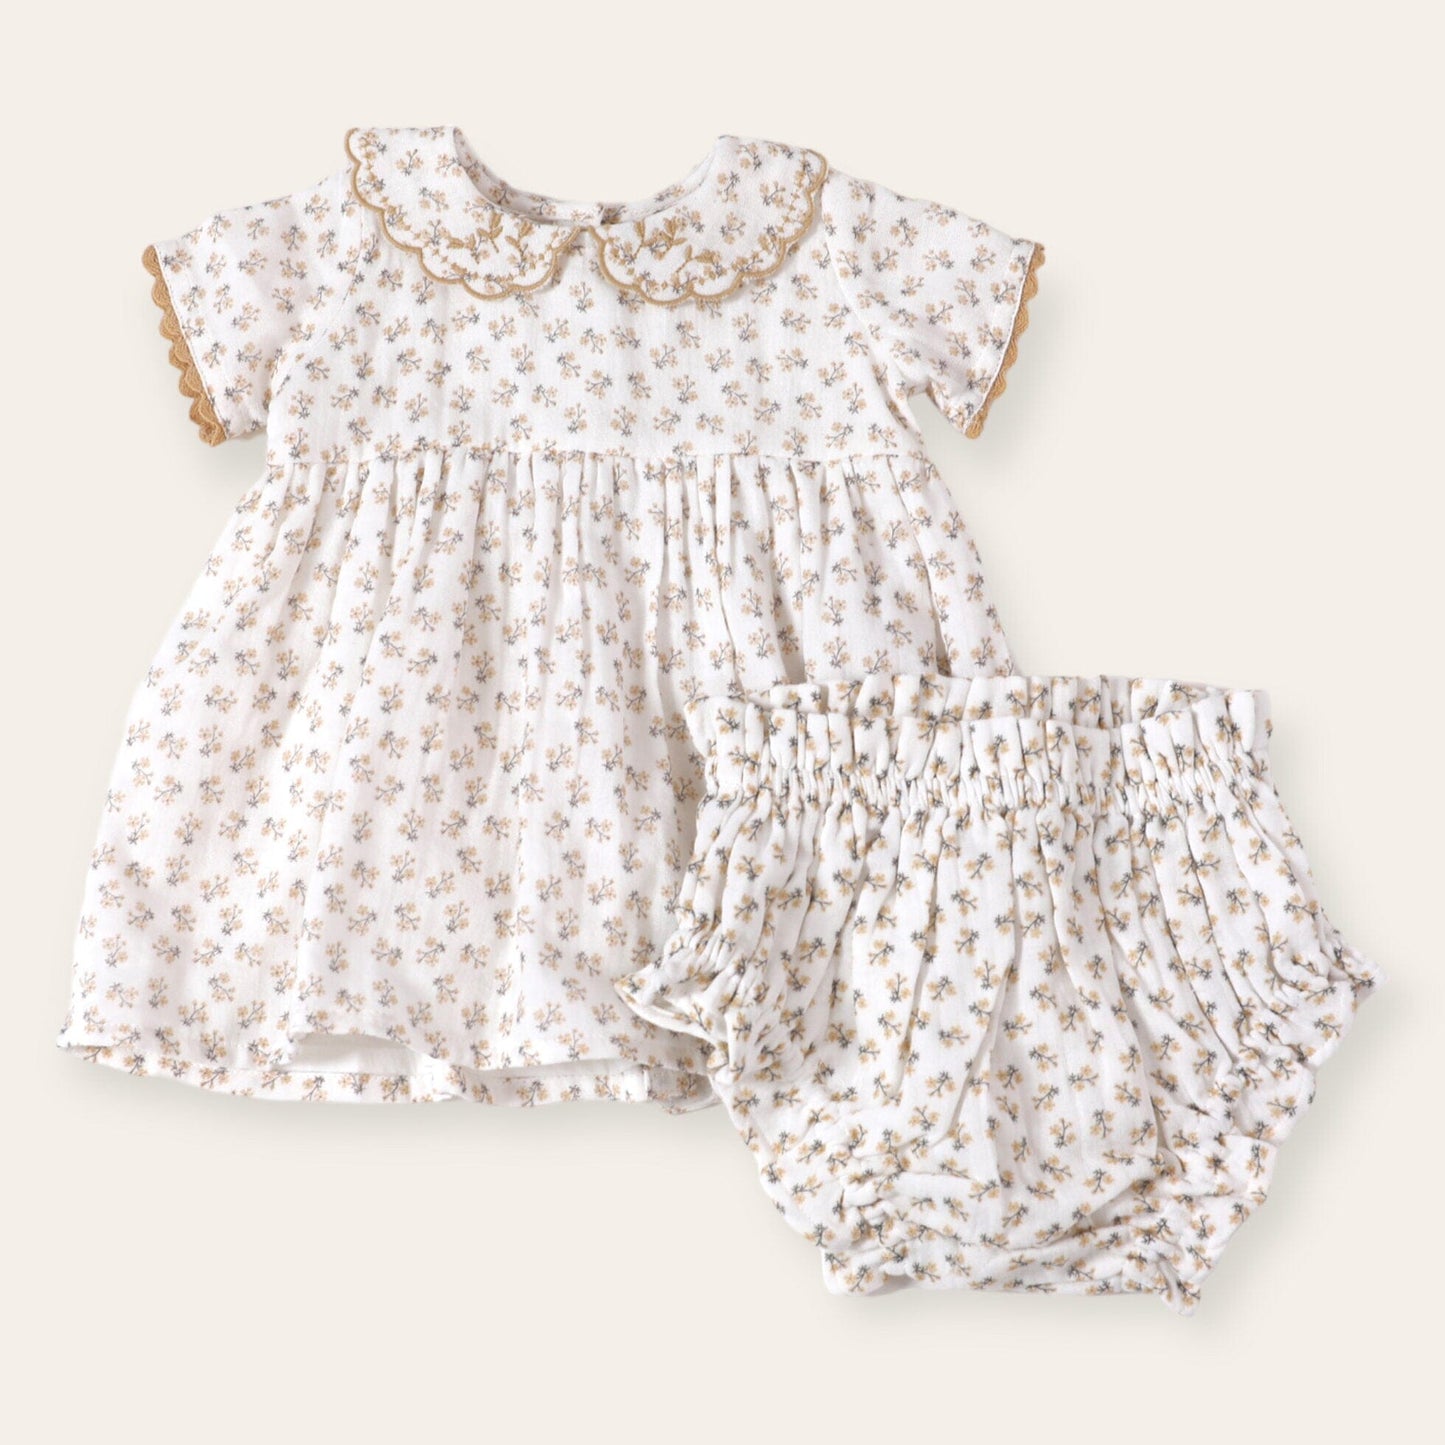 Mustard Floral Dress and Bloomer Set 120 BABY GIRLS APPAREL Viverano 3-6m 